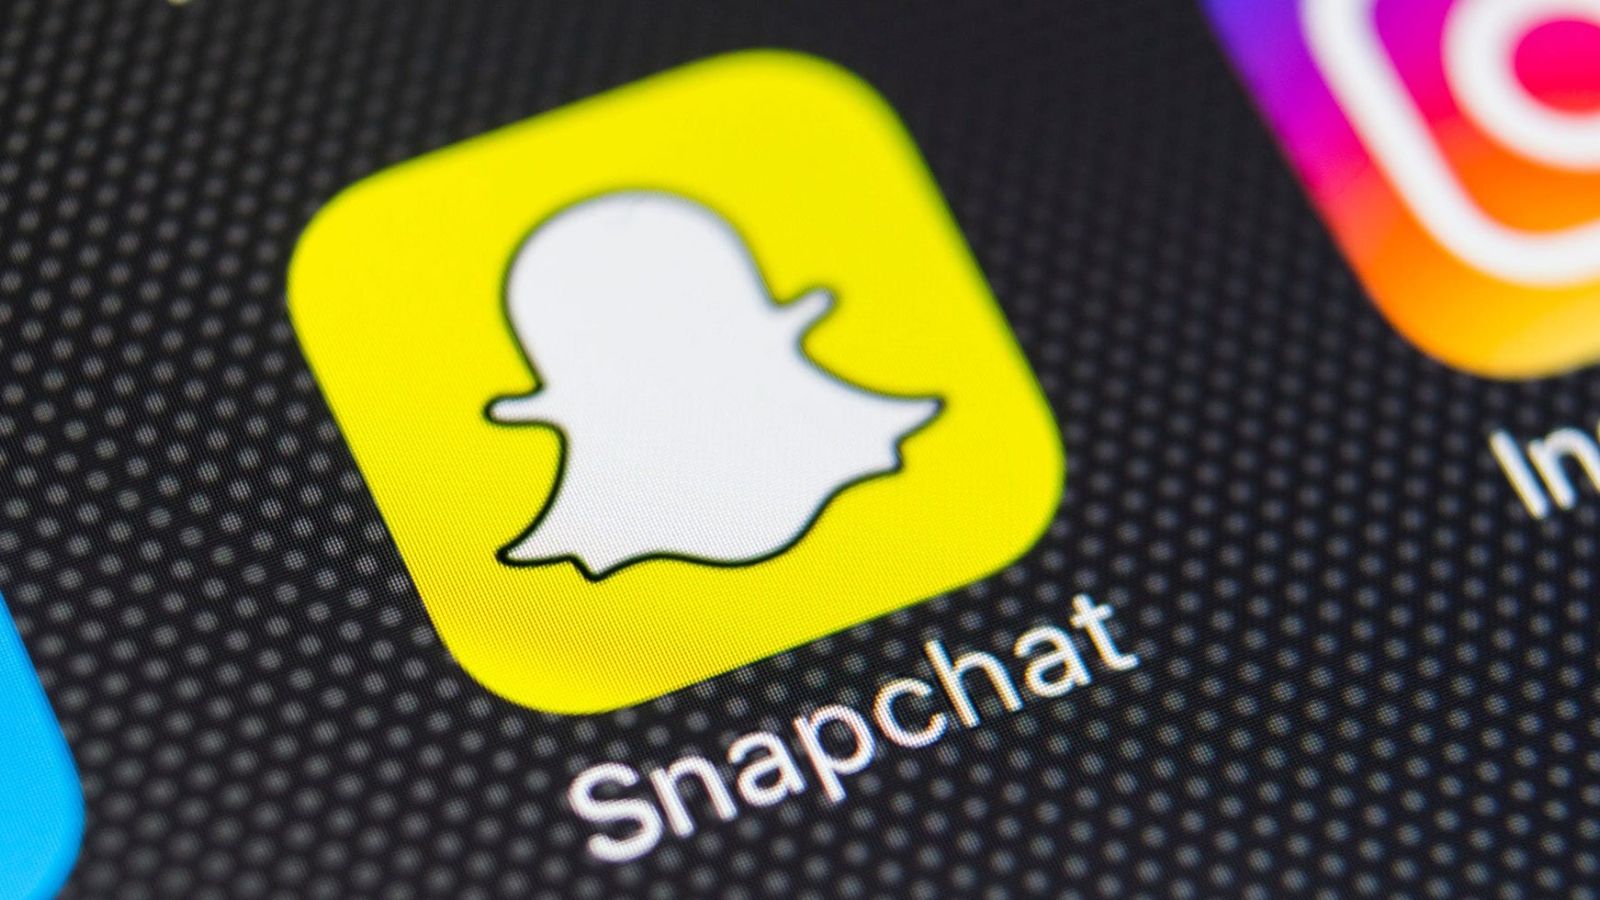 How to add someone on Snapchat without it saying added by search